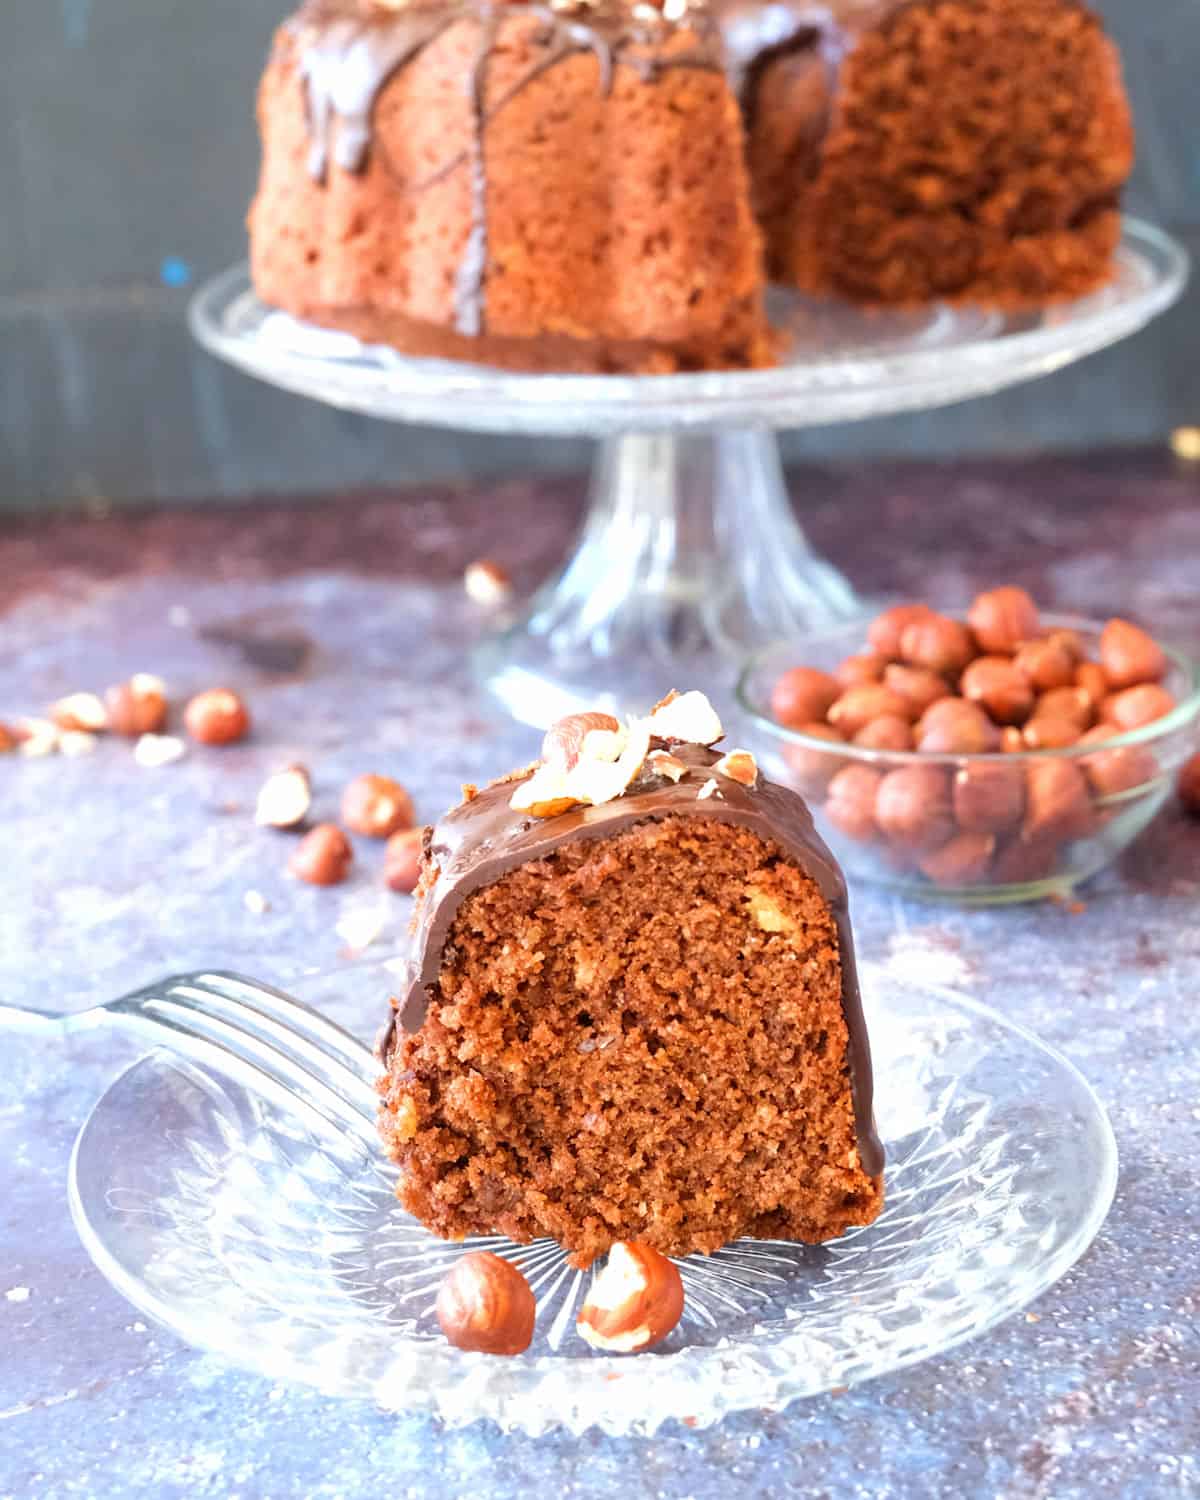 A piece of chocolate nut cake with hazelnuts in the background.